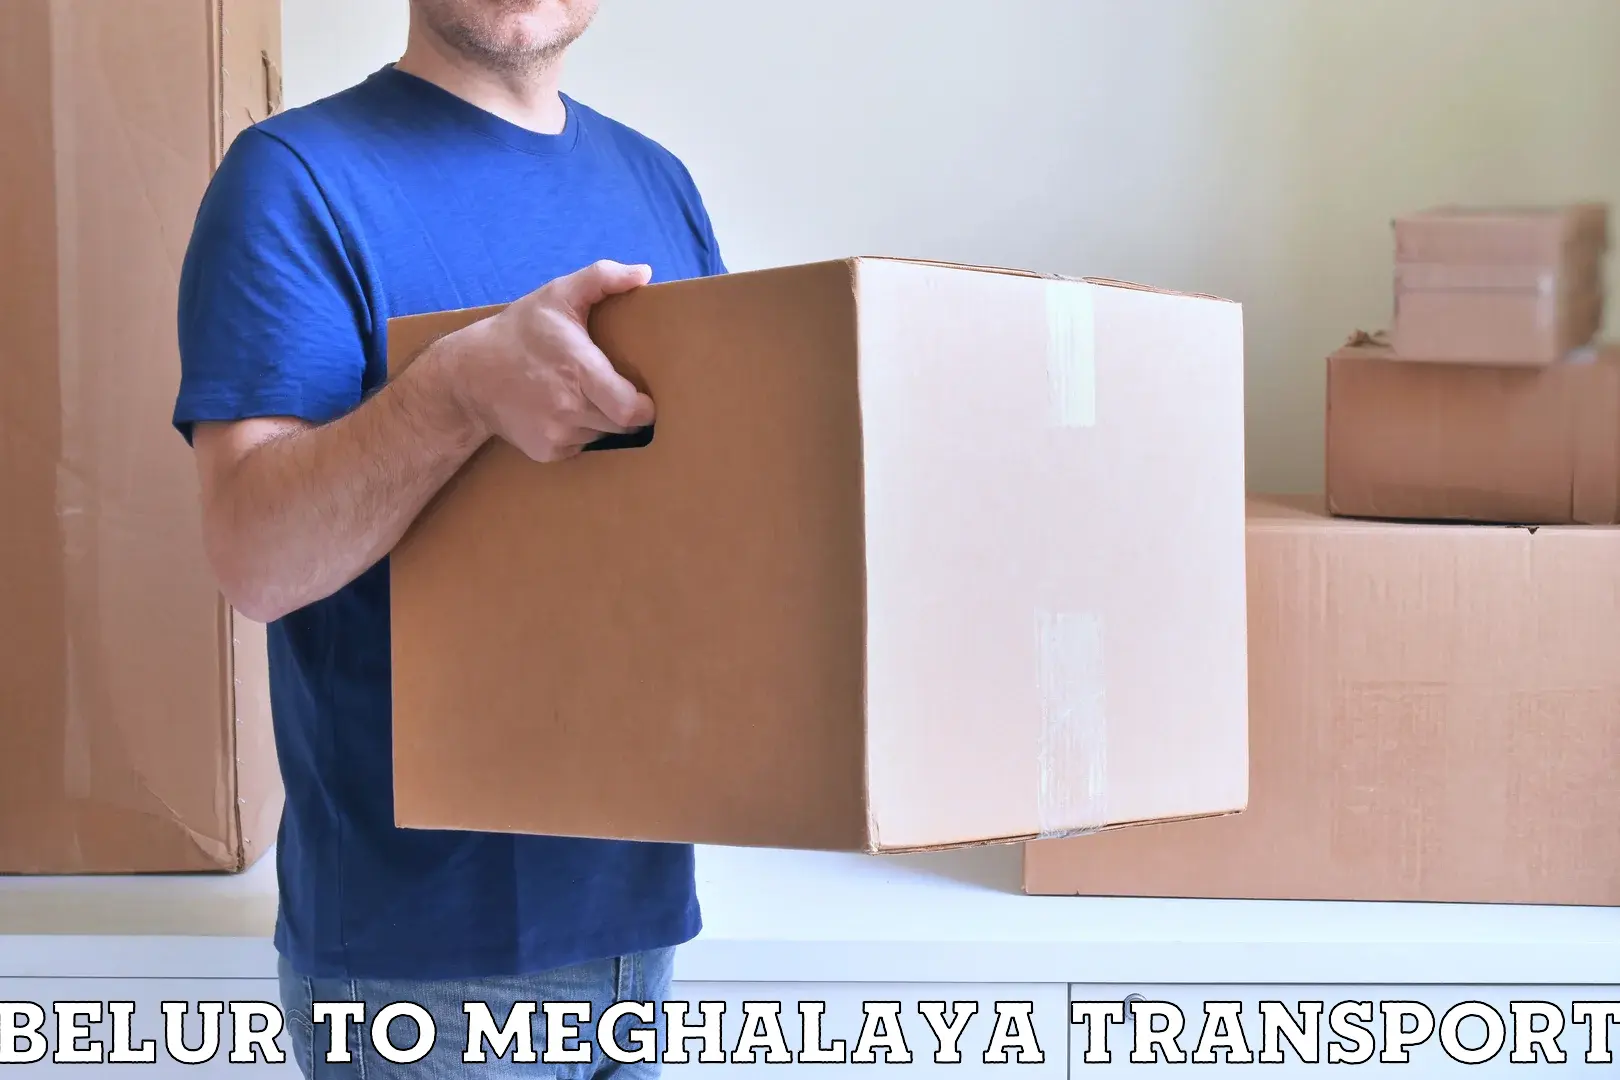 Container transport service Belur to Meghalaya